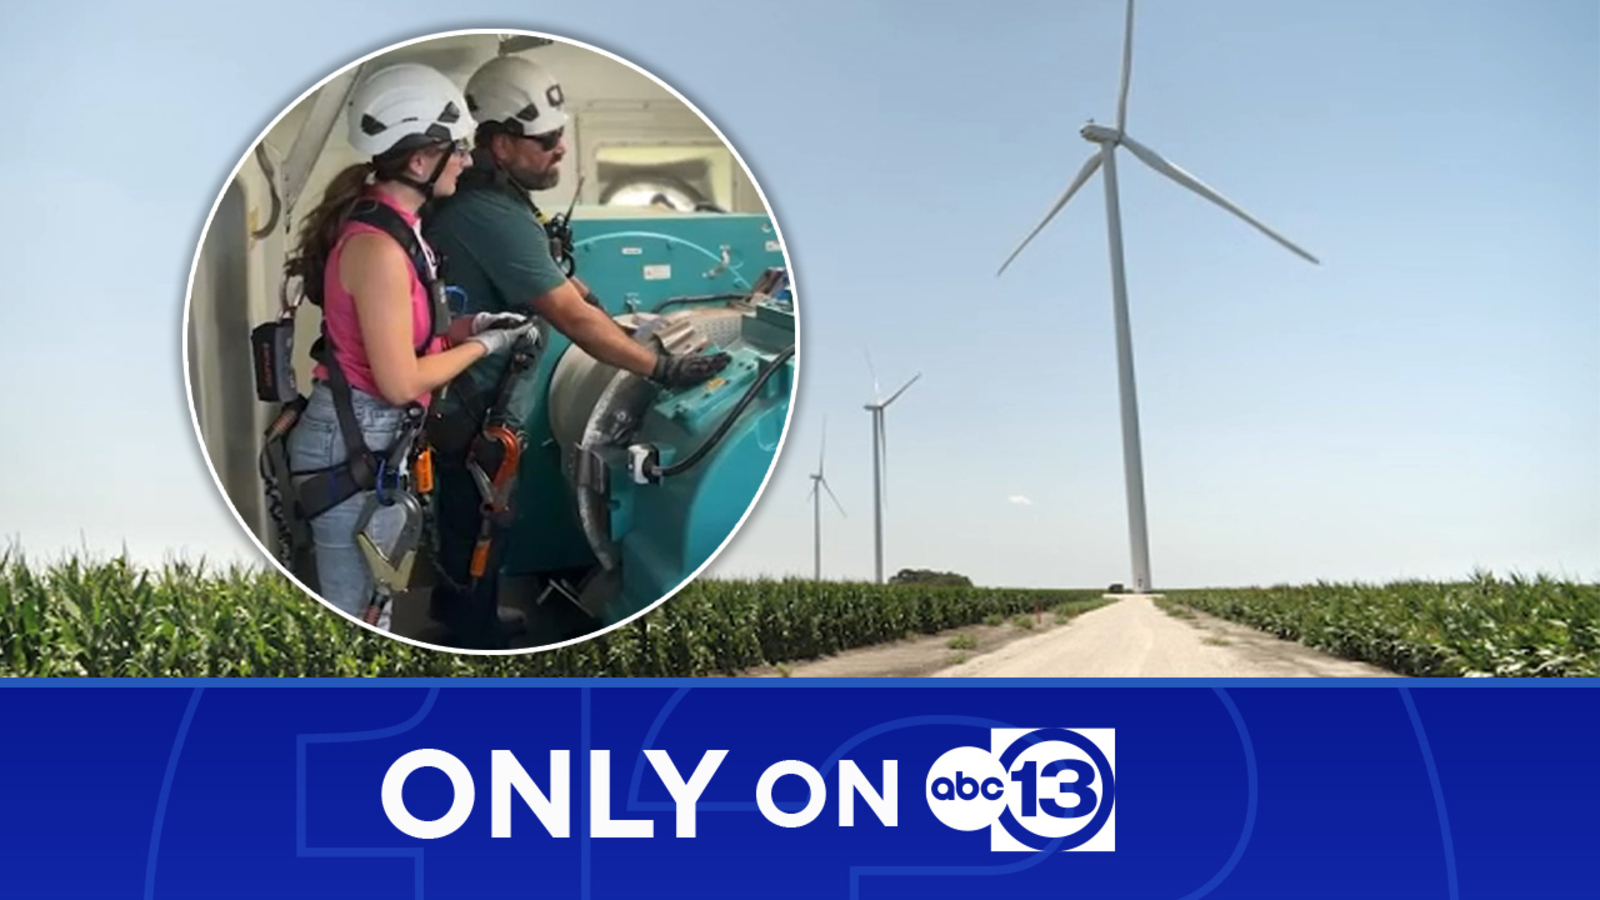 Texas renewable energy sources: ABC13 tours new Wharton Co. wind farm Prairie Switch Wind Project near Highway 59 [Video]